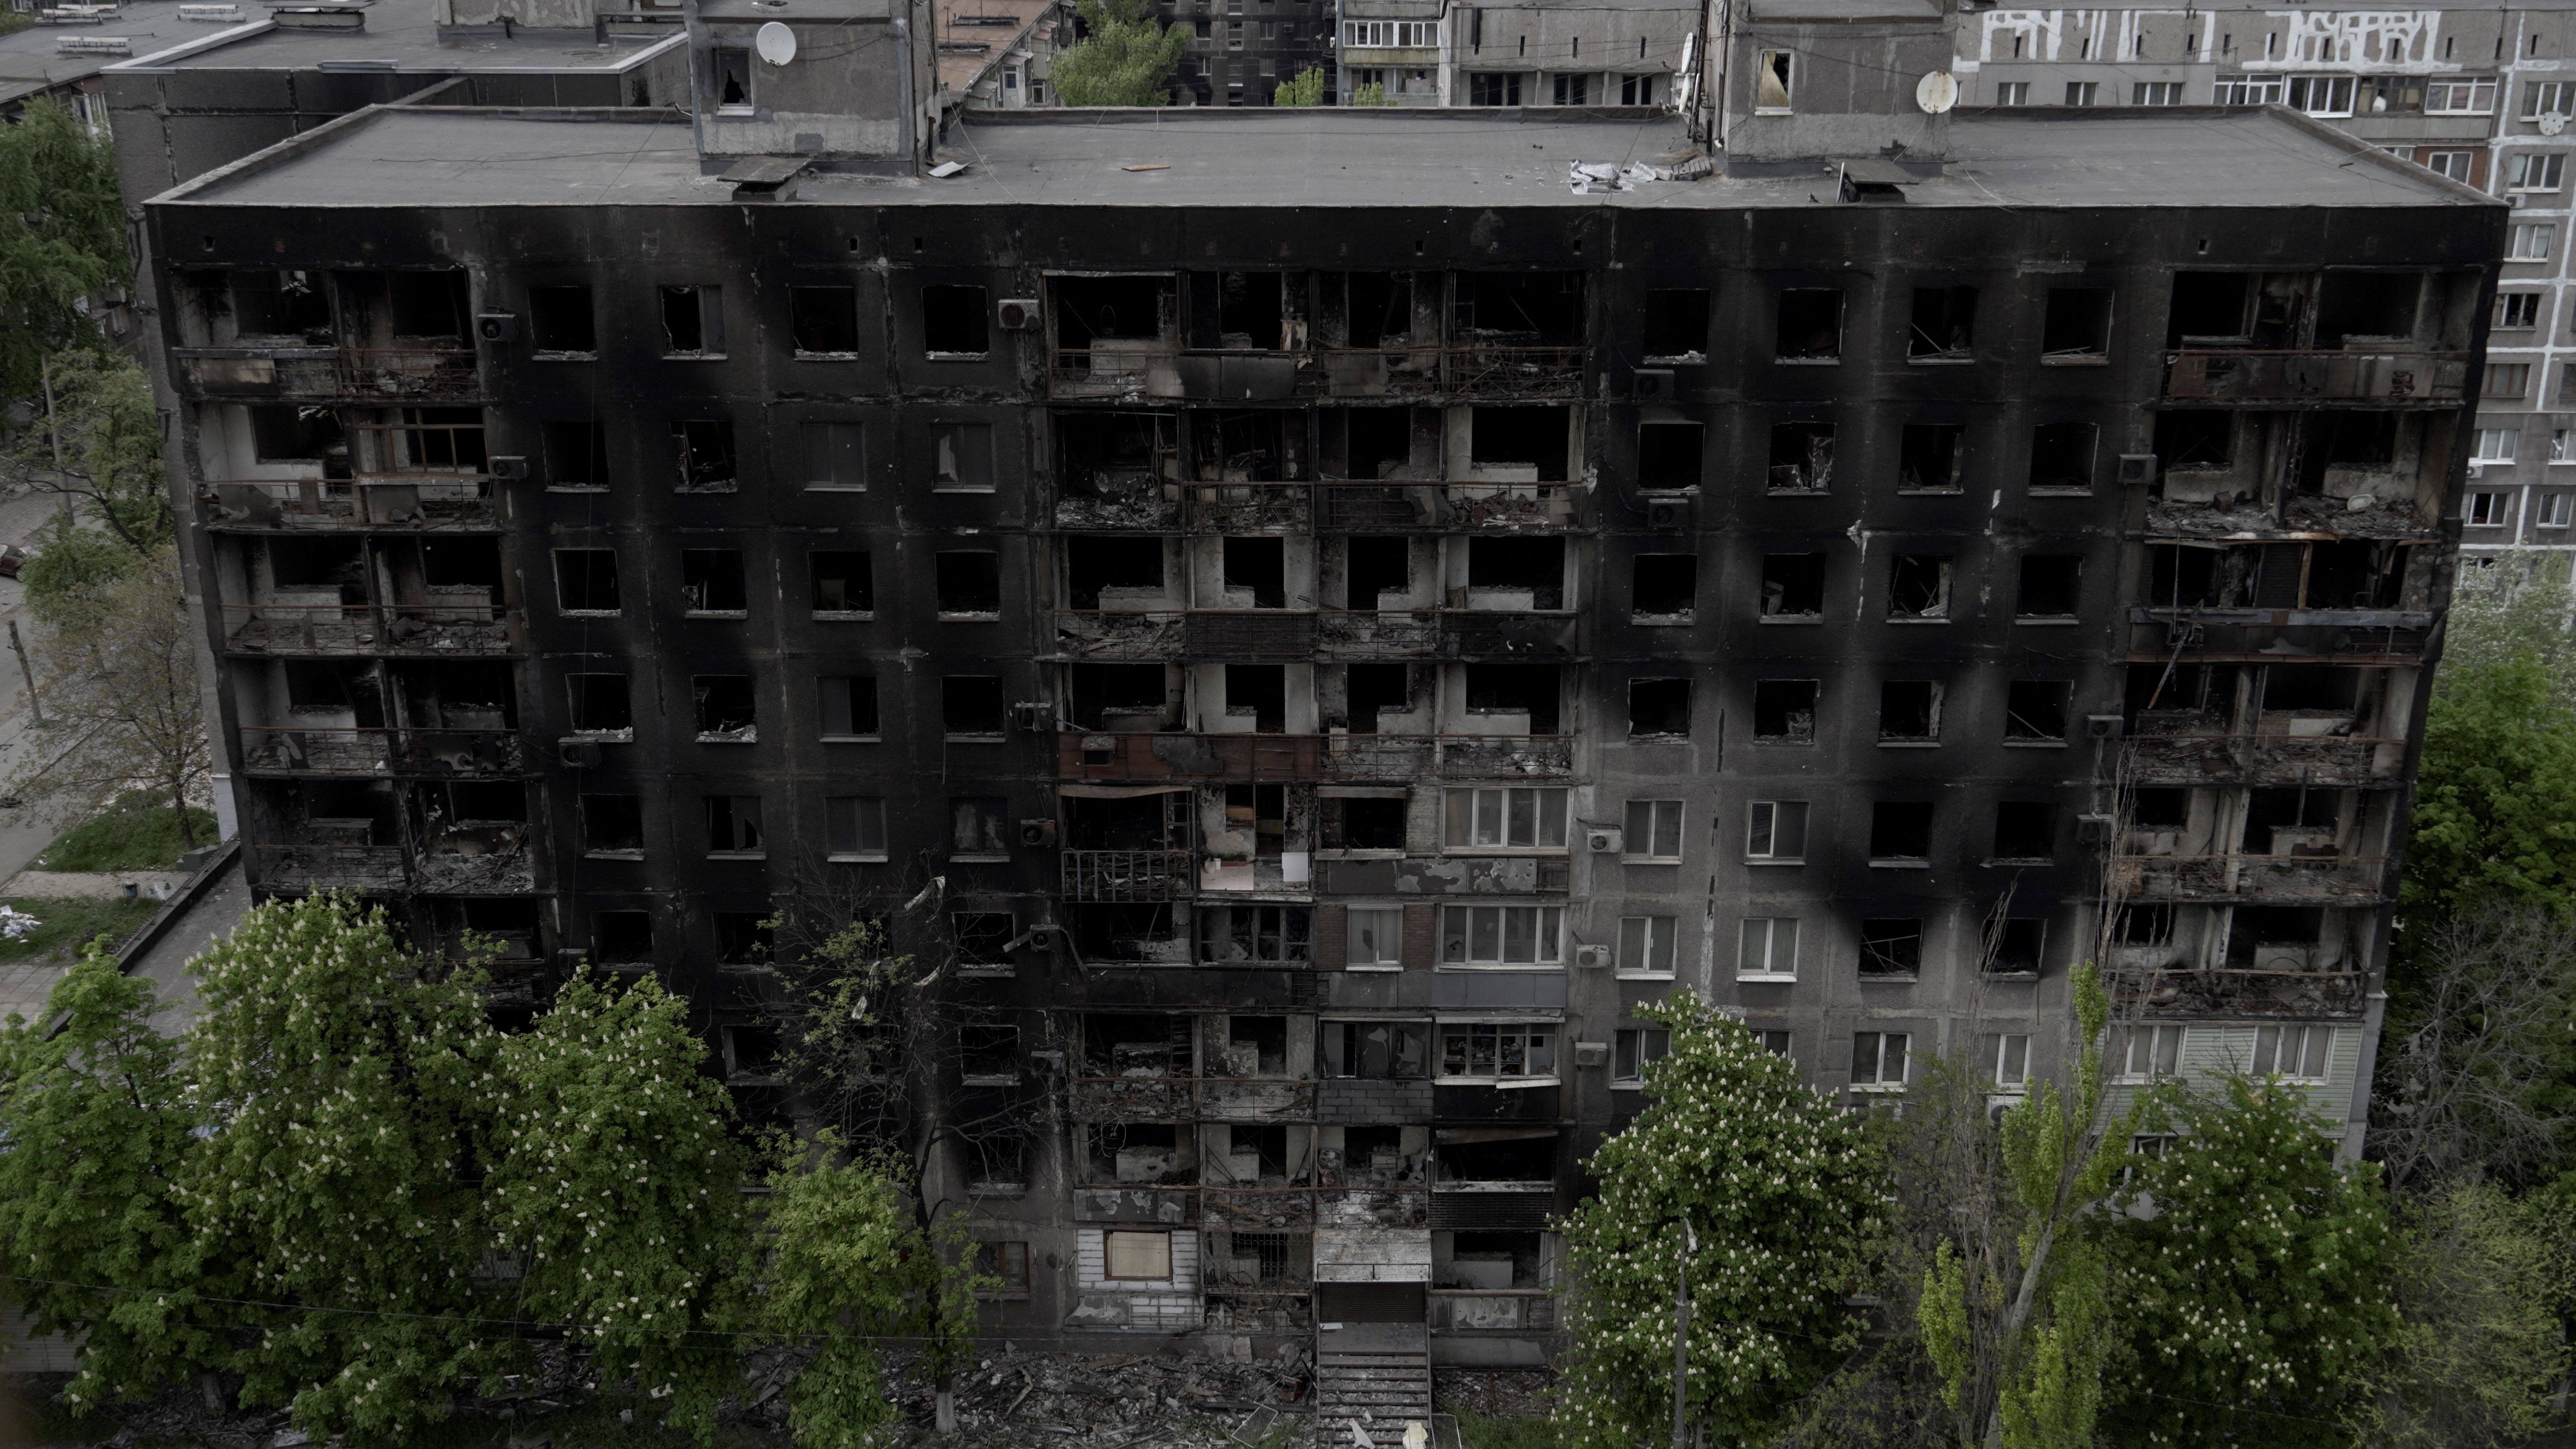 Mariupol evacuees: ‘People just dying, city in chaos’